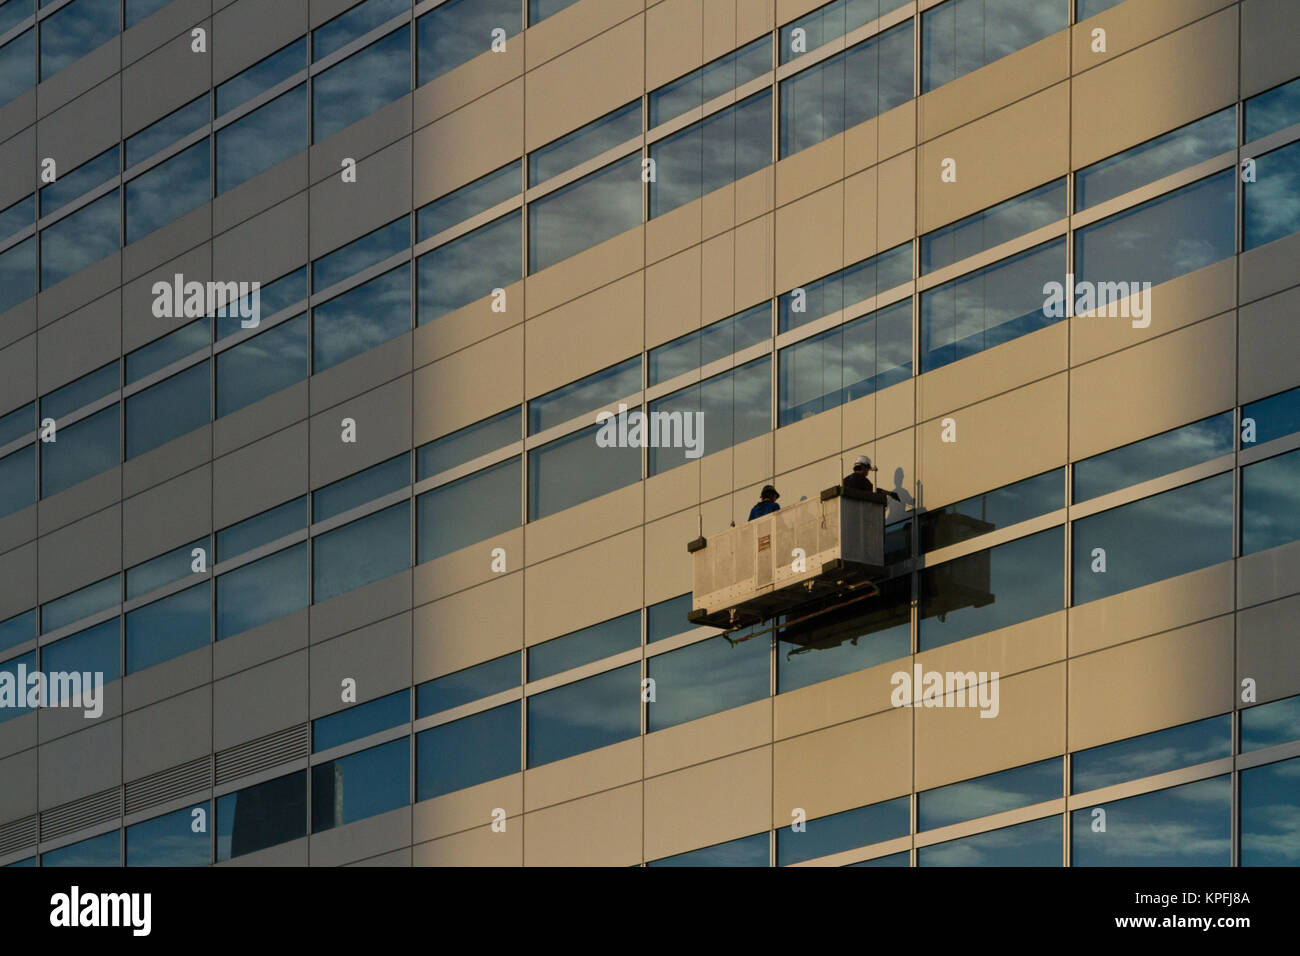 Window cleaners on the side of an office building in Odaiba Tokyo, Japan Stock Photo